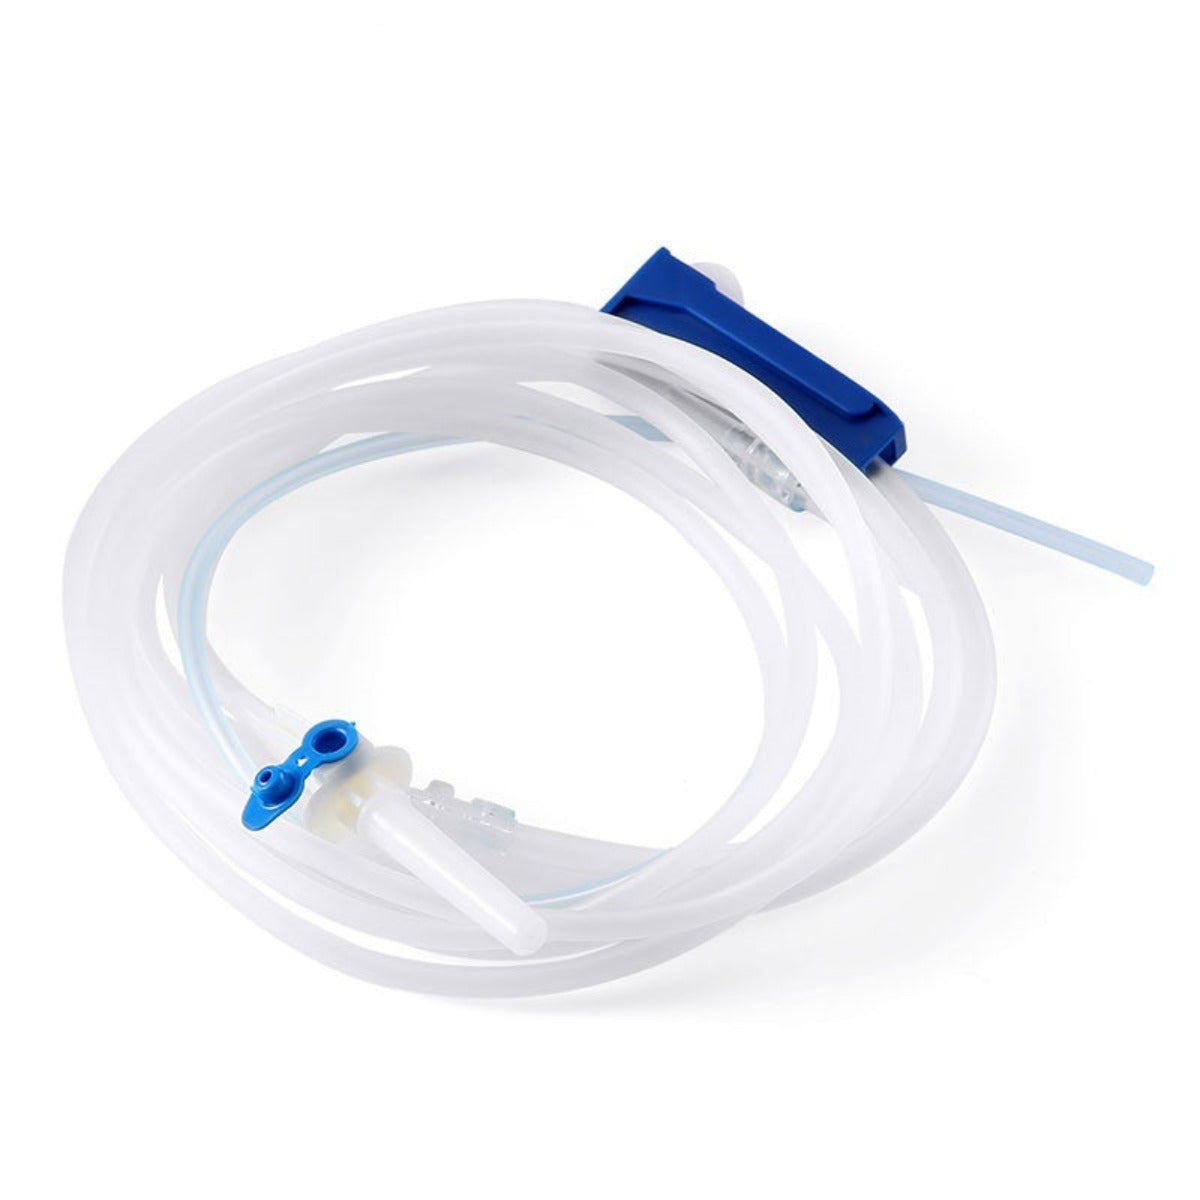 Dental Disposable Surgical Irrigation Tube - pairaydental.com